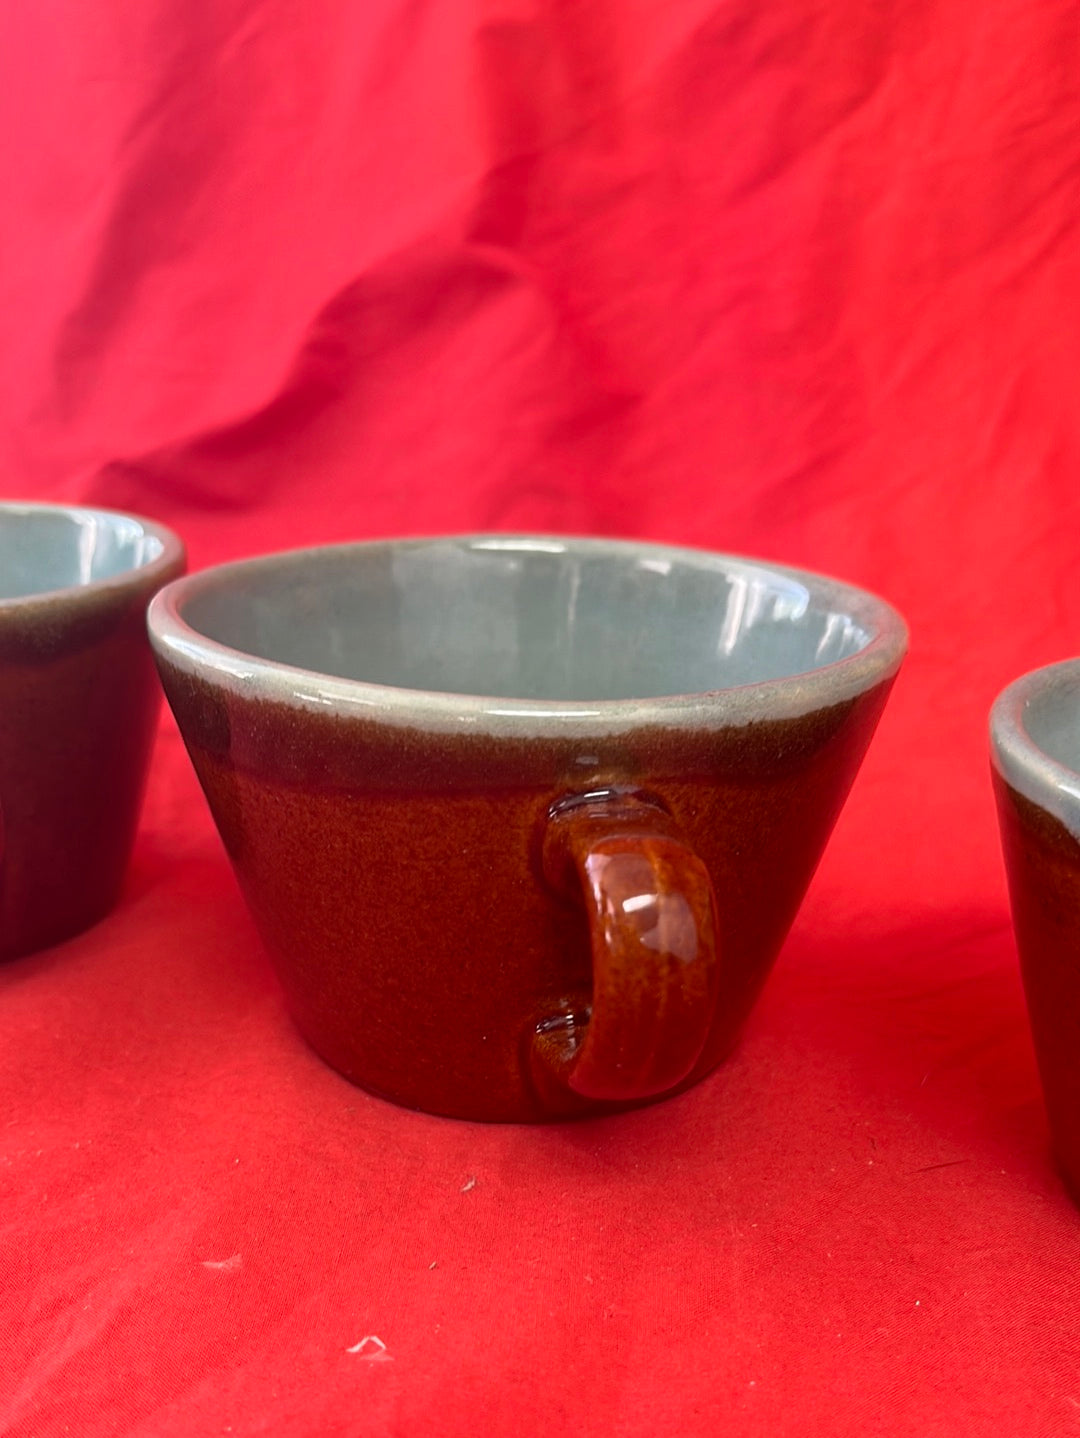 VTG - Set of 3 Brown/Turquoise "Country Fare" Cups by John B Taylor/Zanesville Pottery